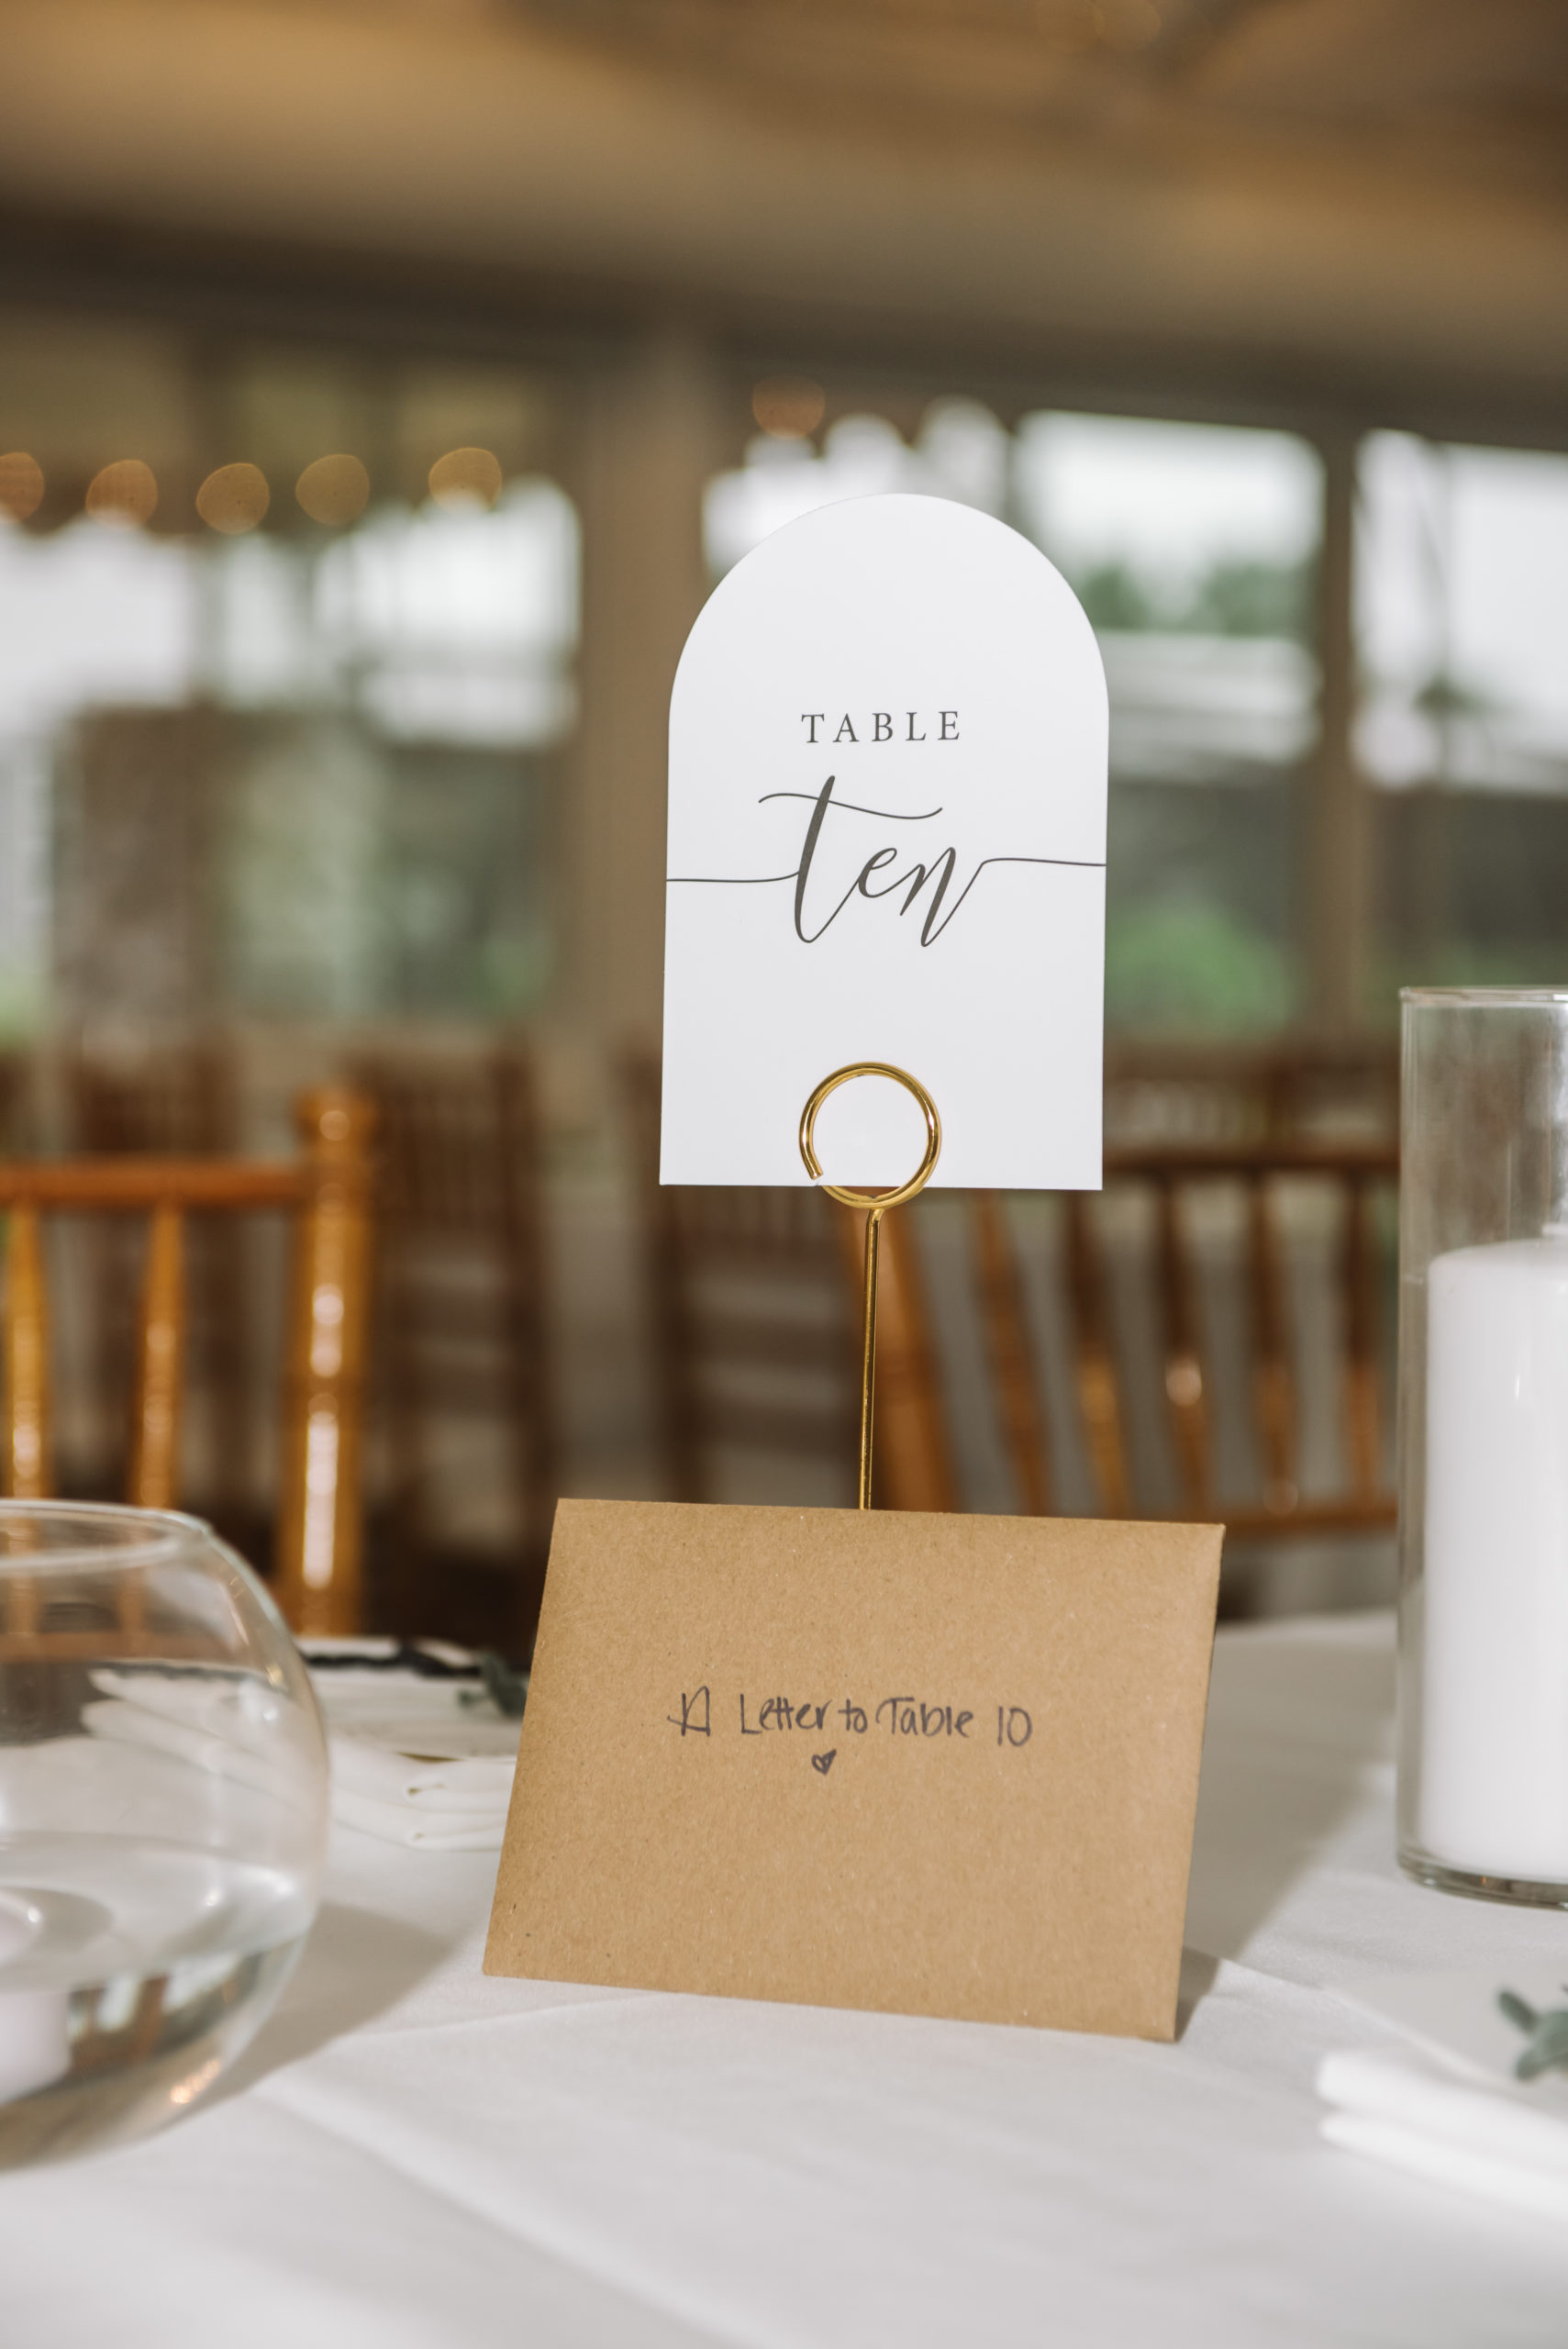 Close up of the "TABLE ten" placecard and a brown envelope with the note "A Letter to Table 10 [illustrated heart]" written on the front. They are set on a white tablecloth. There is an unlit candle behind and to the left. Reception chairs are visible in the background.